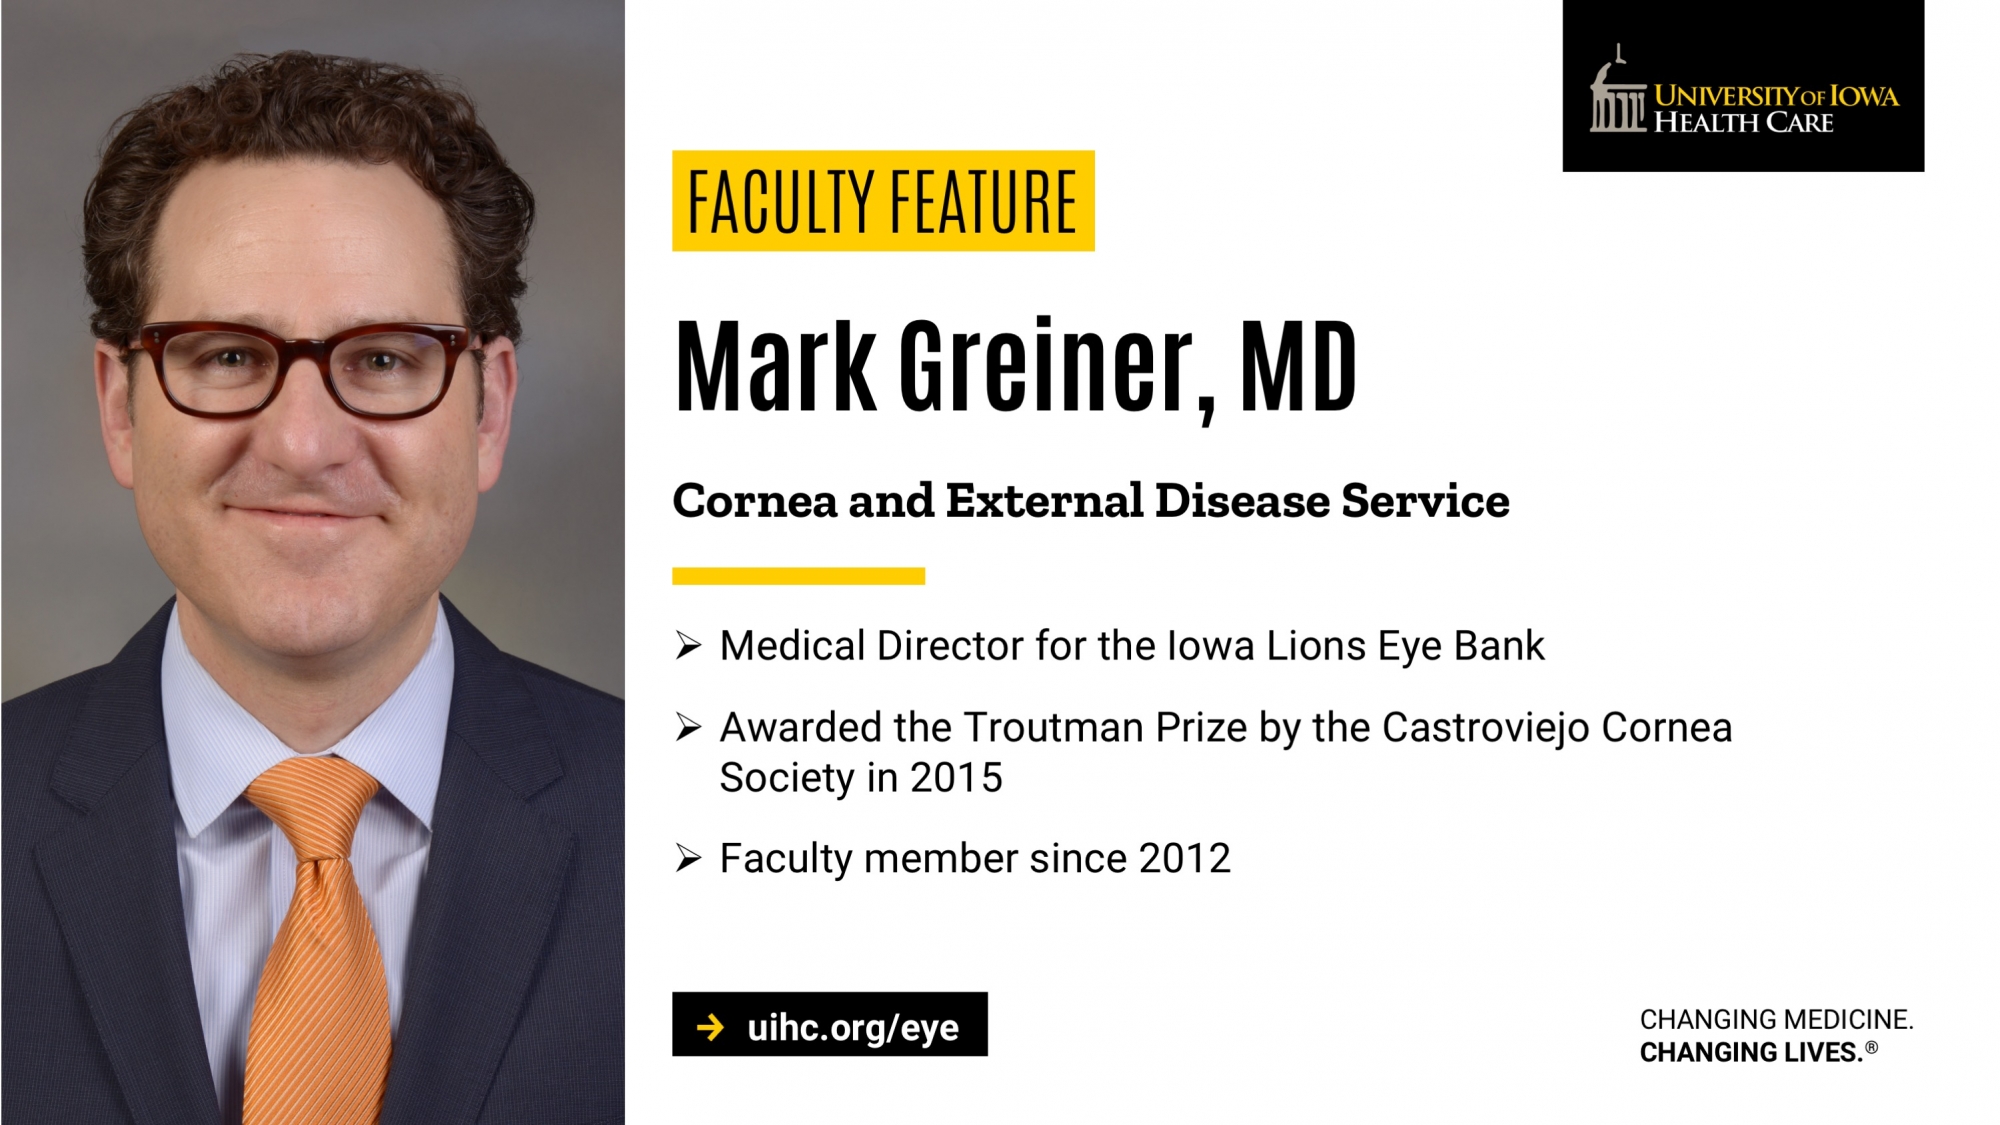 Faculty Feature: Mark Greiner, MD